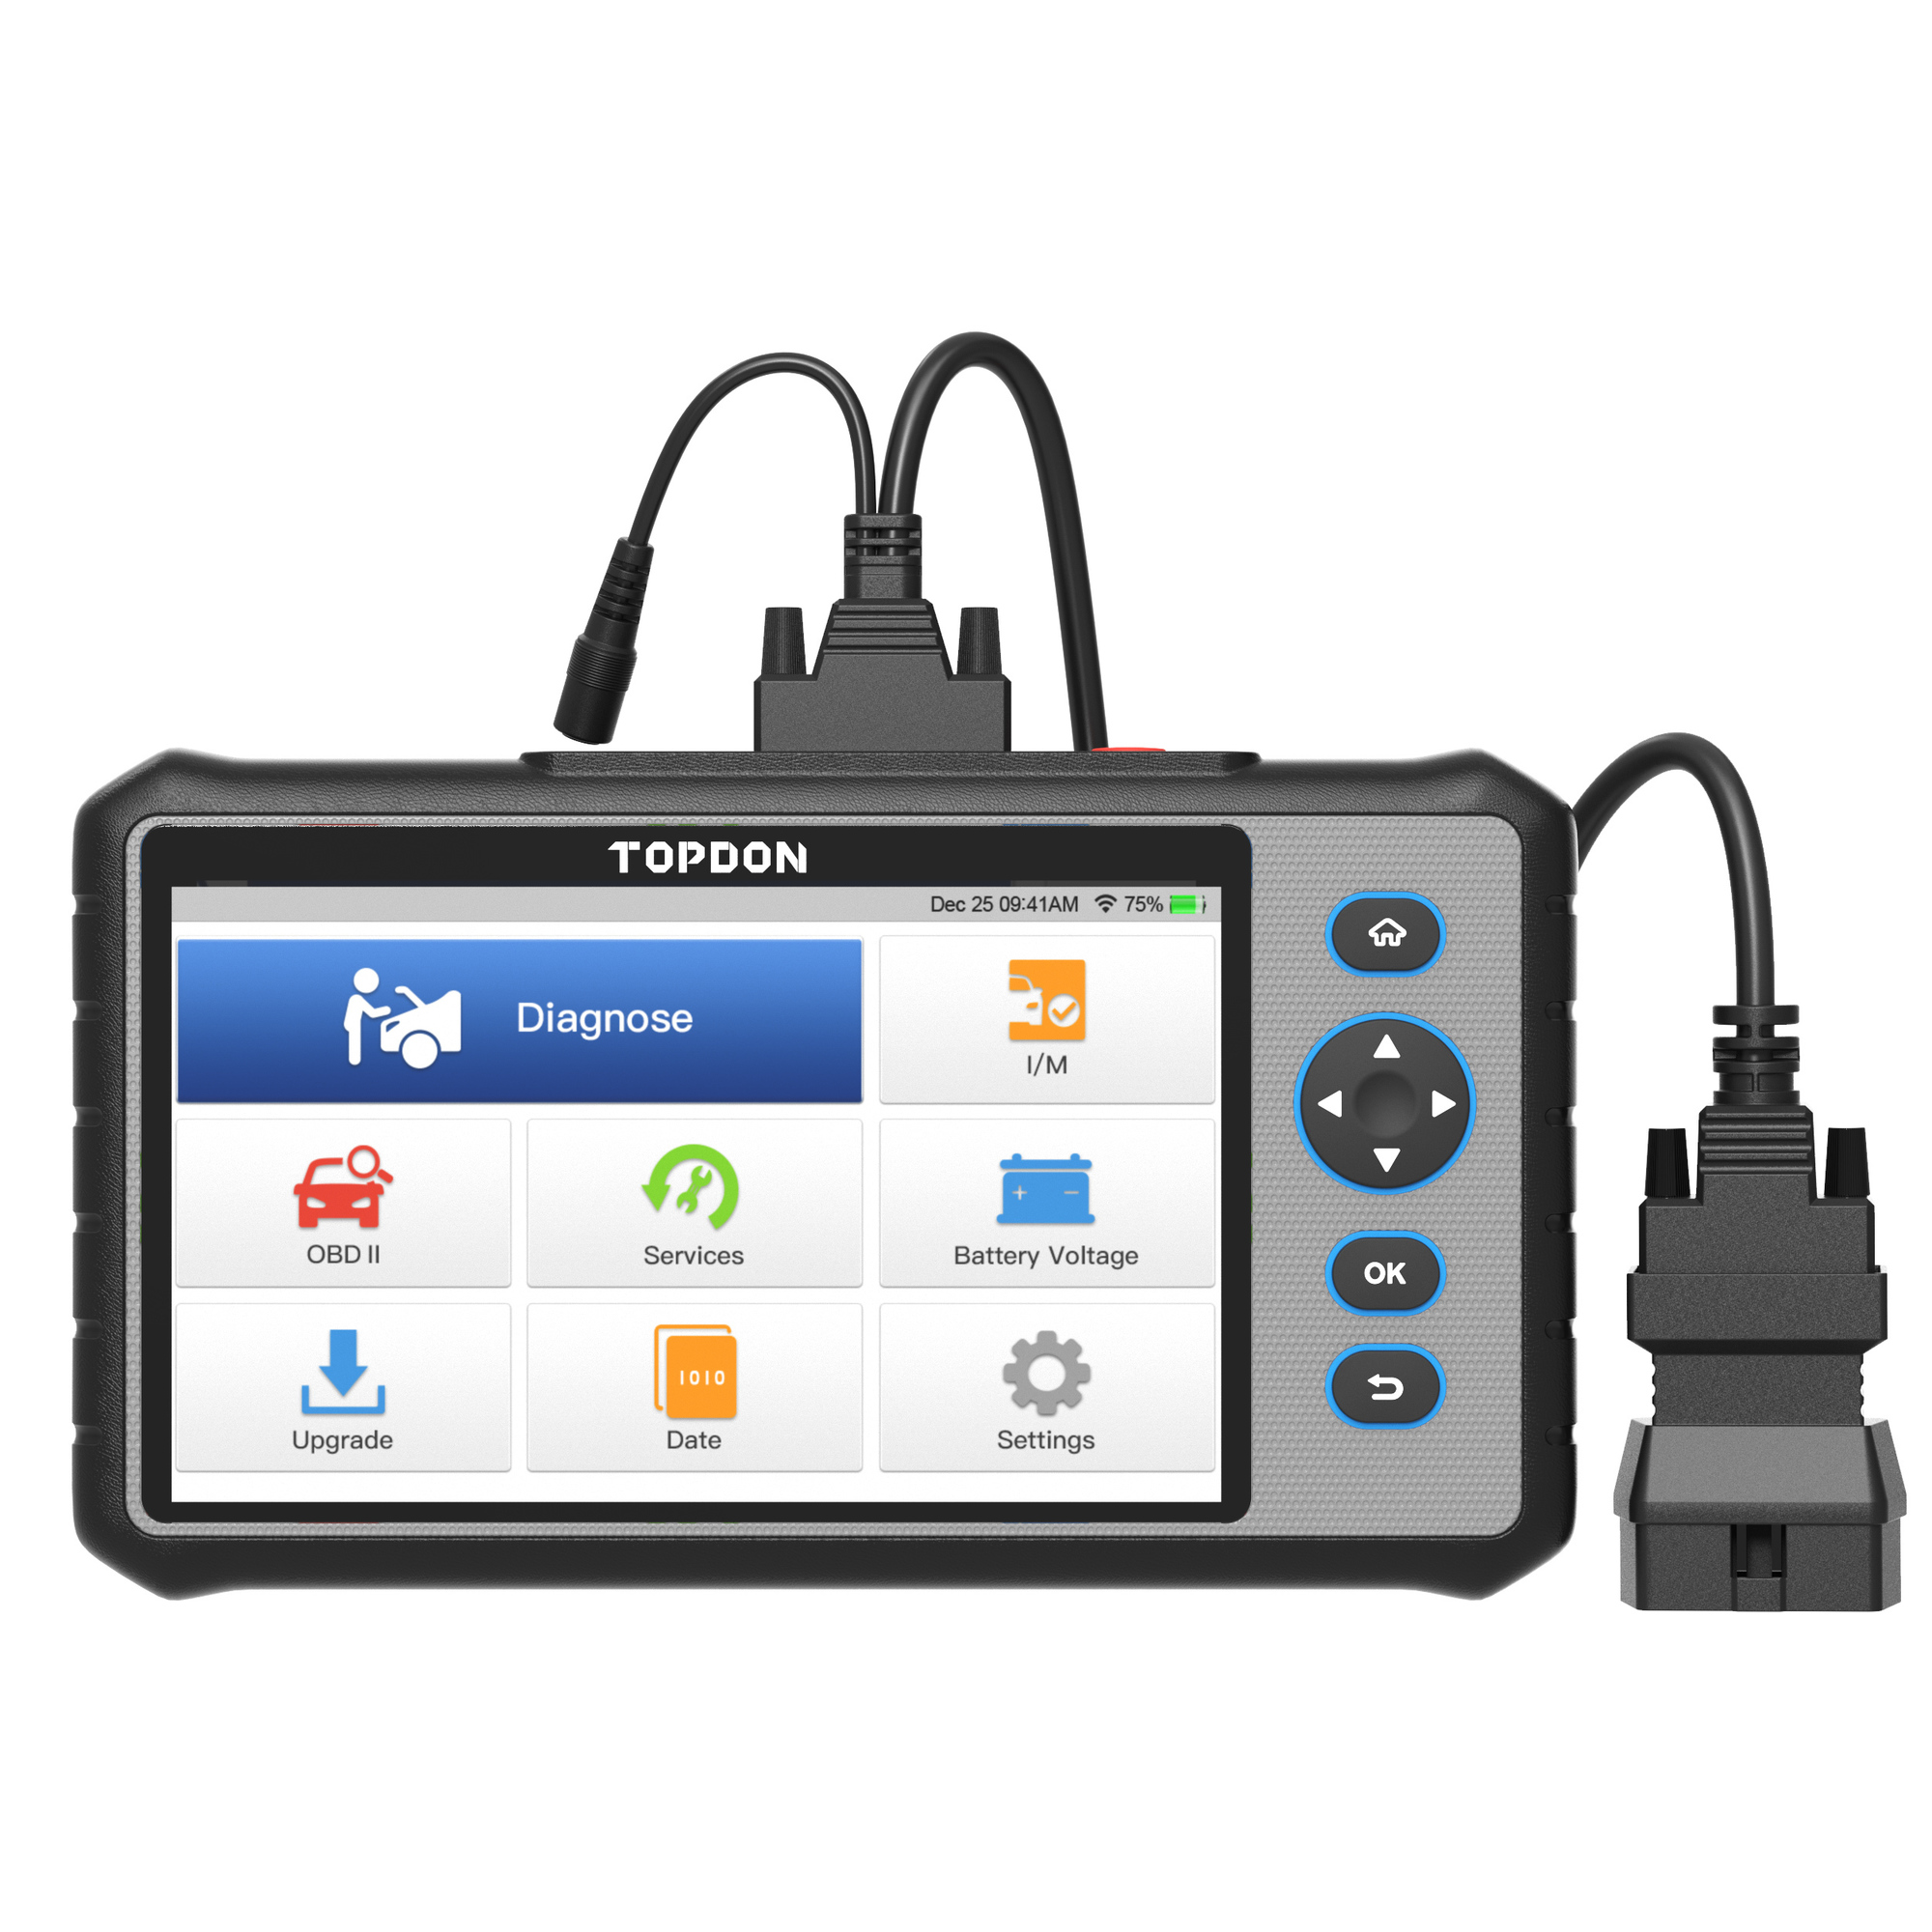 TOPDON, Android based Mid-Level Diagnostic Powerhouse, Model AD800